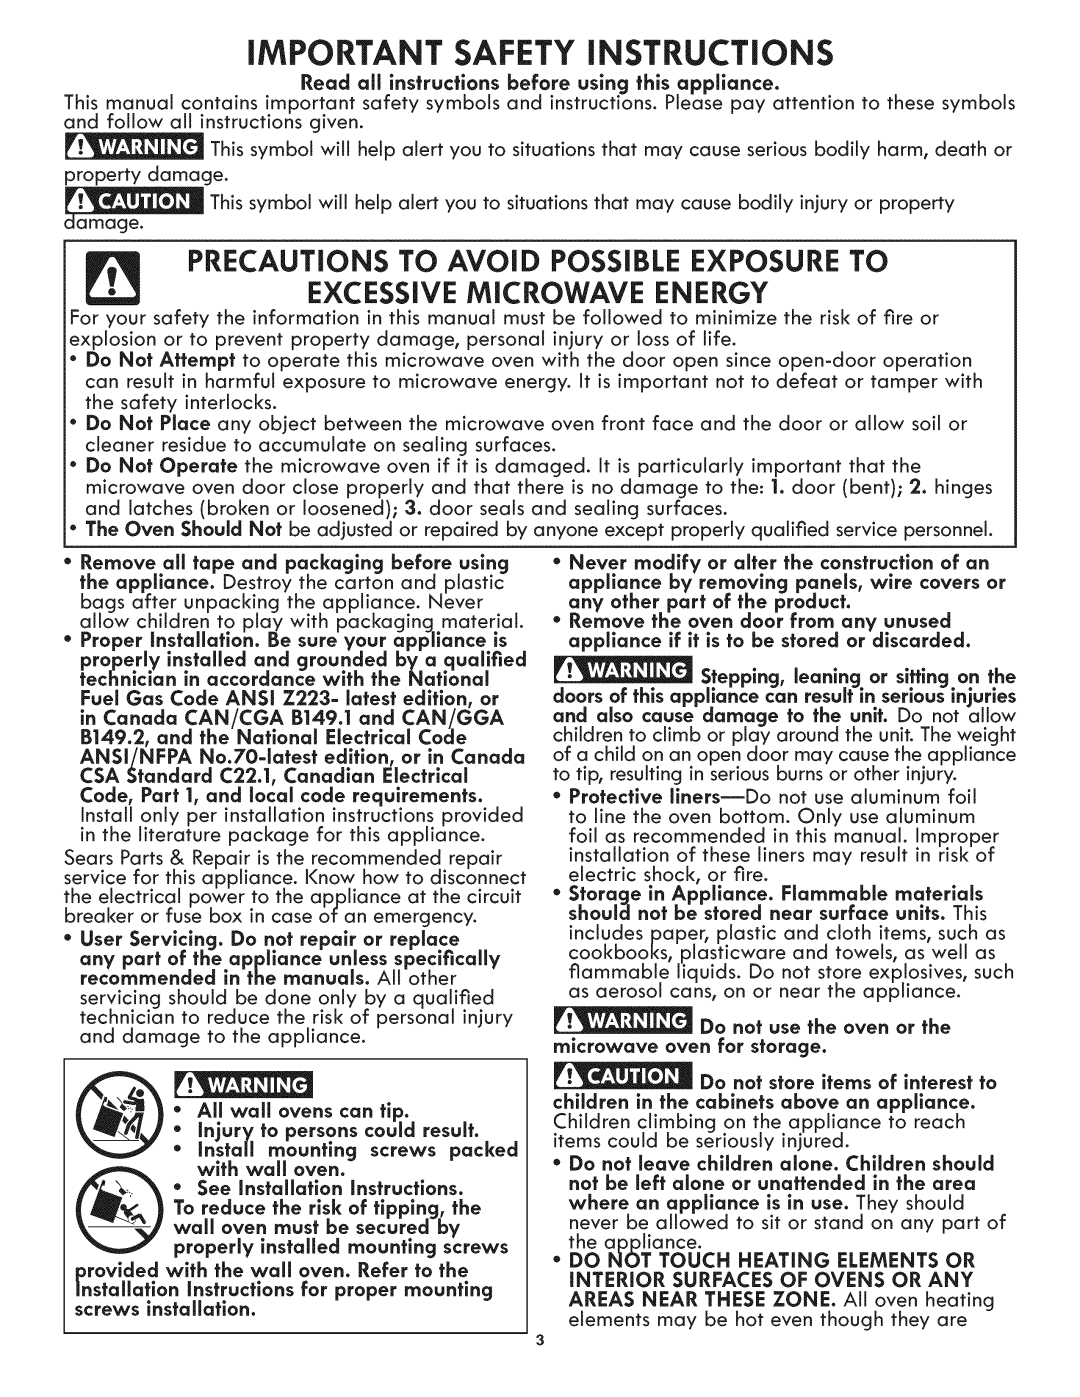 Kenmore 790.488 manual iMPORTANT SAFETY iNSTRUCTiONS, Precautions To Avoid Possible Exposure To, Excessive Microwave Energy 